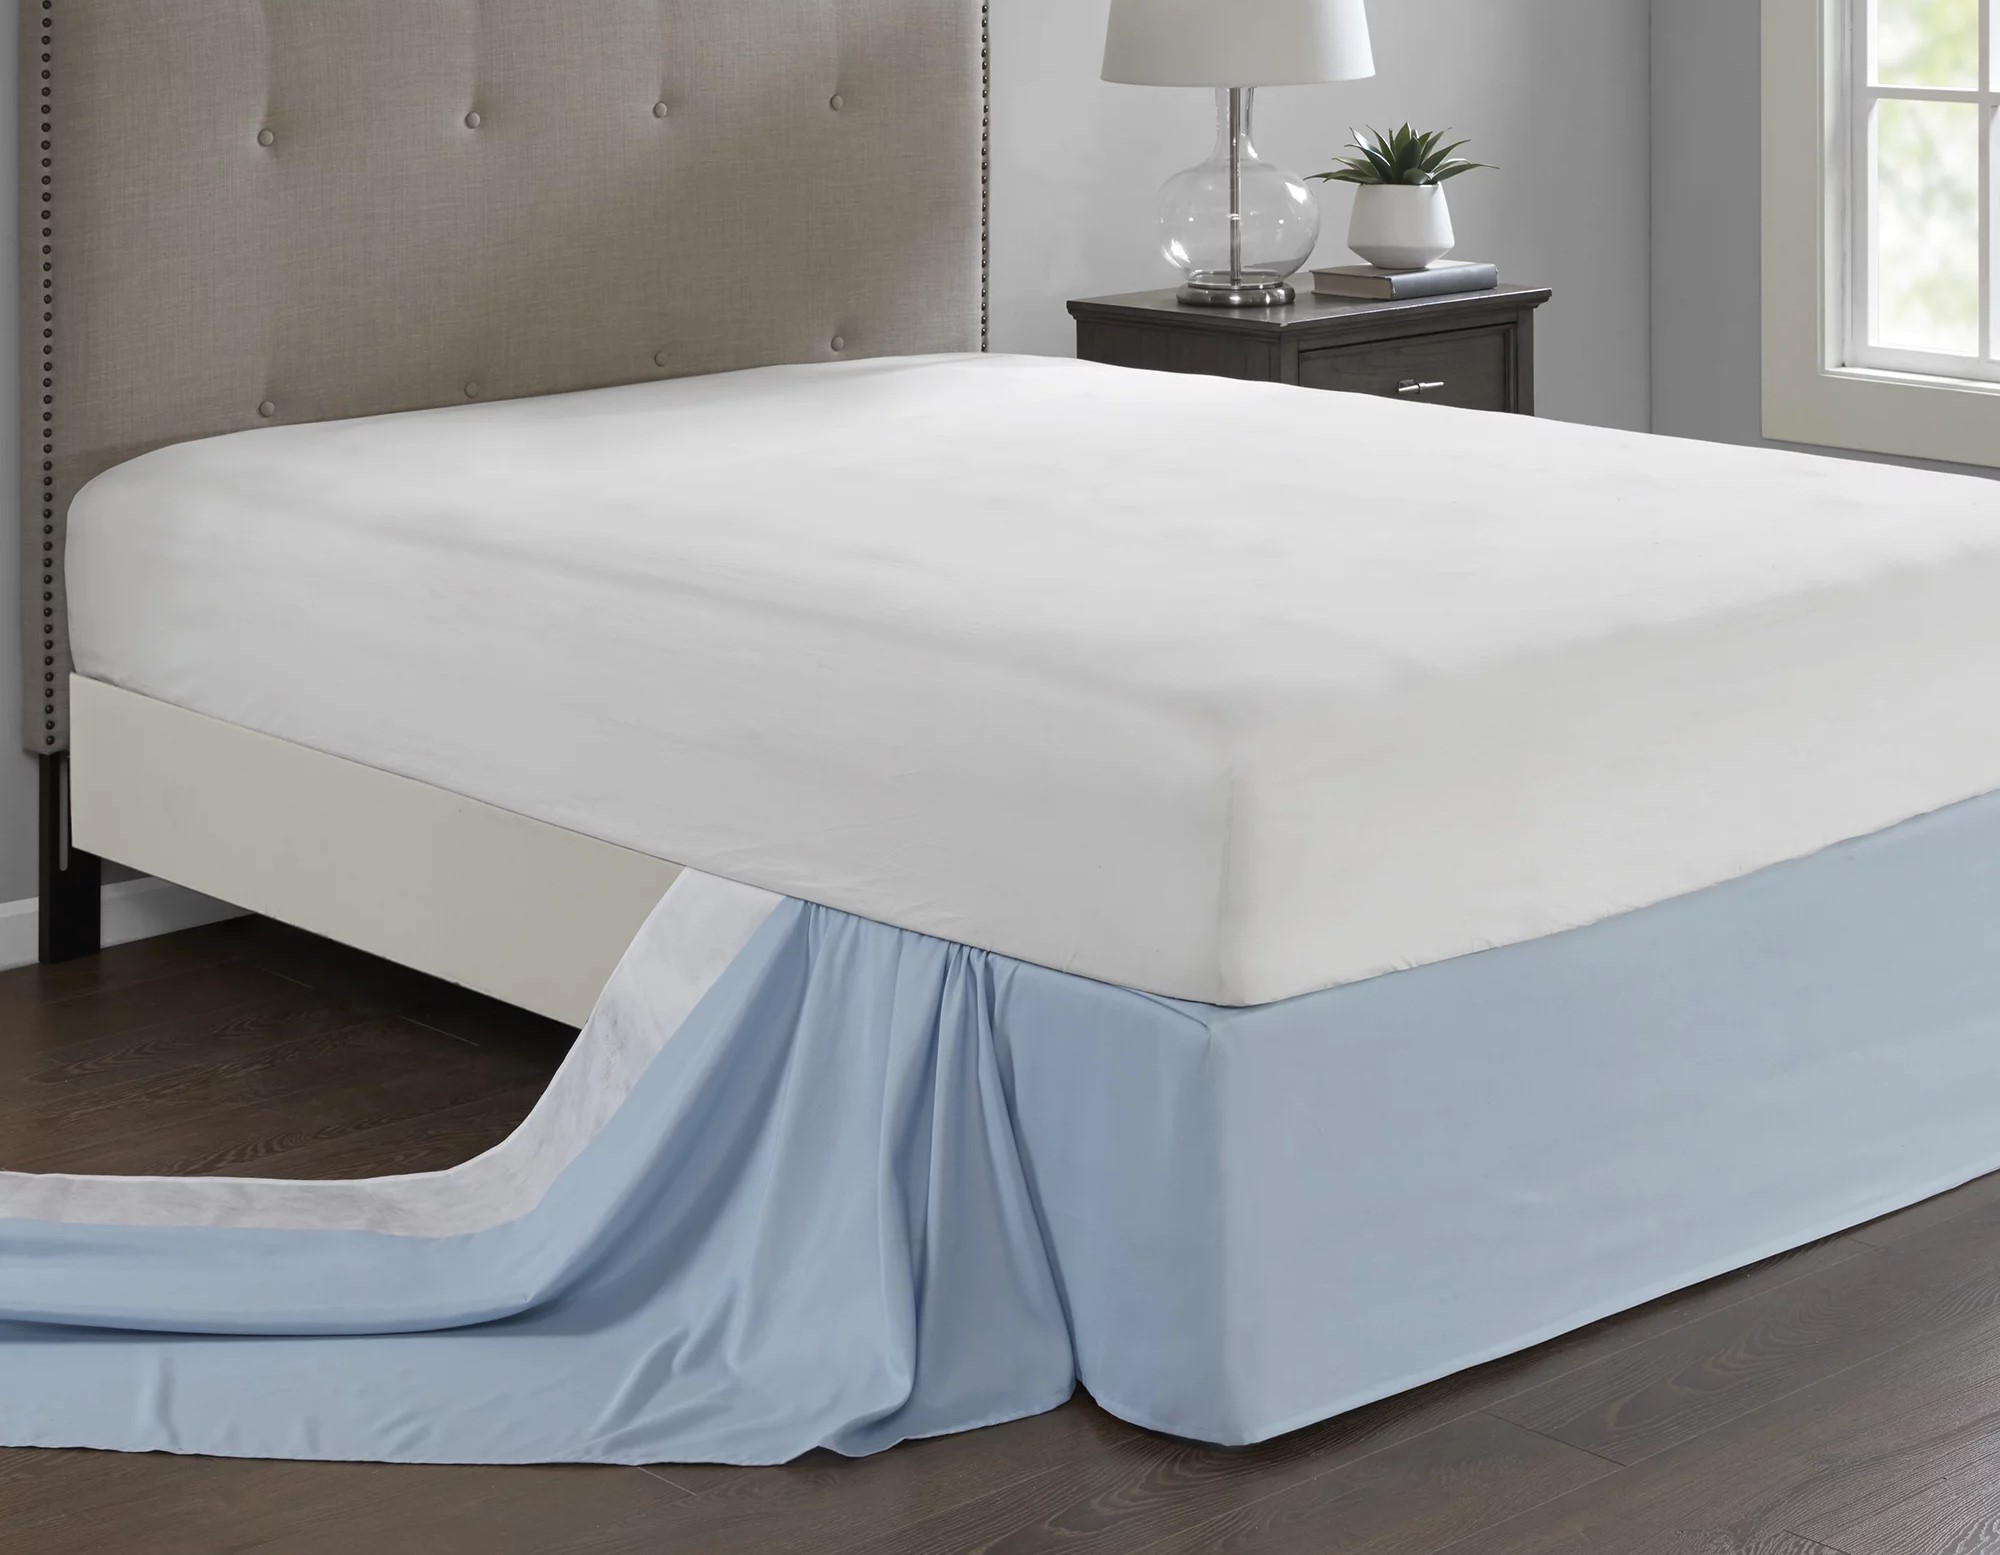 How To Put A Bed Skirt On An Adjustable Base